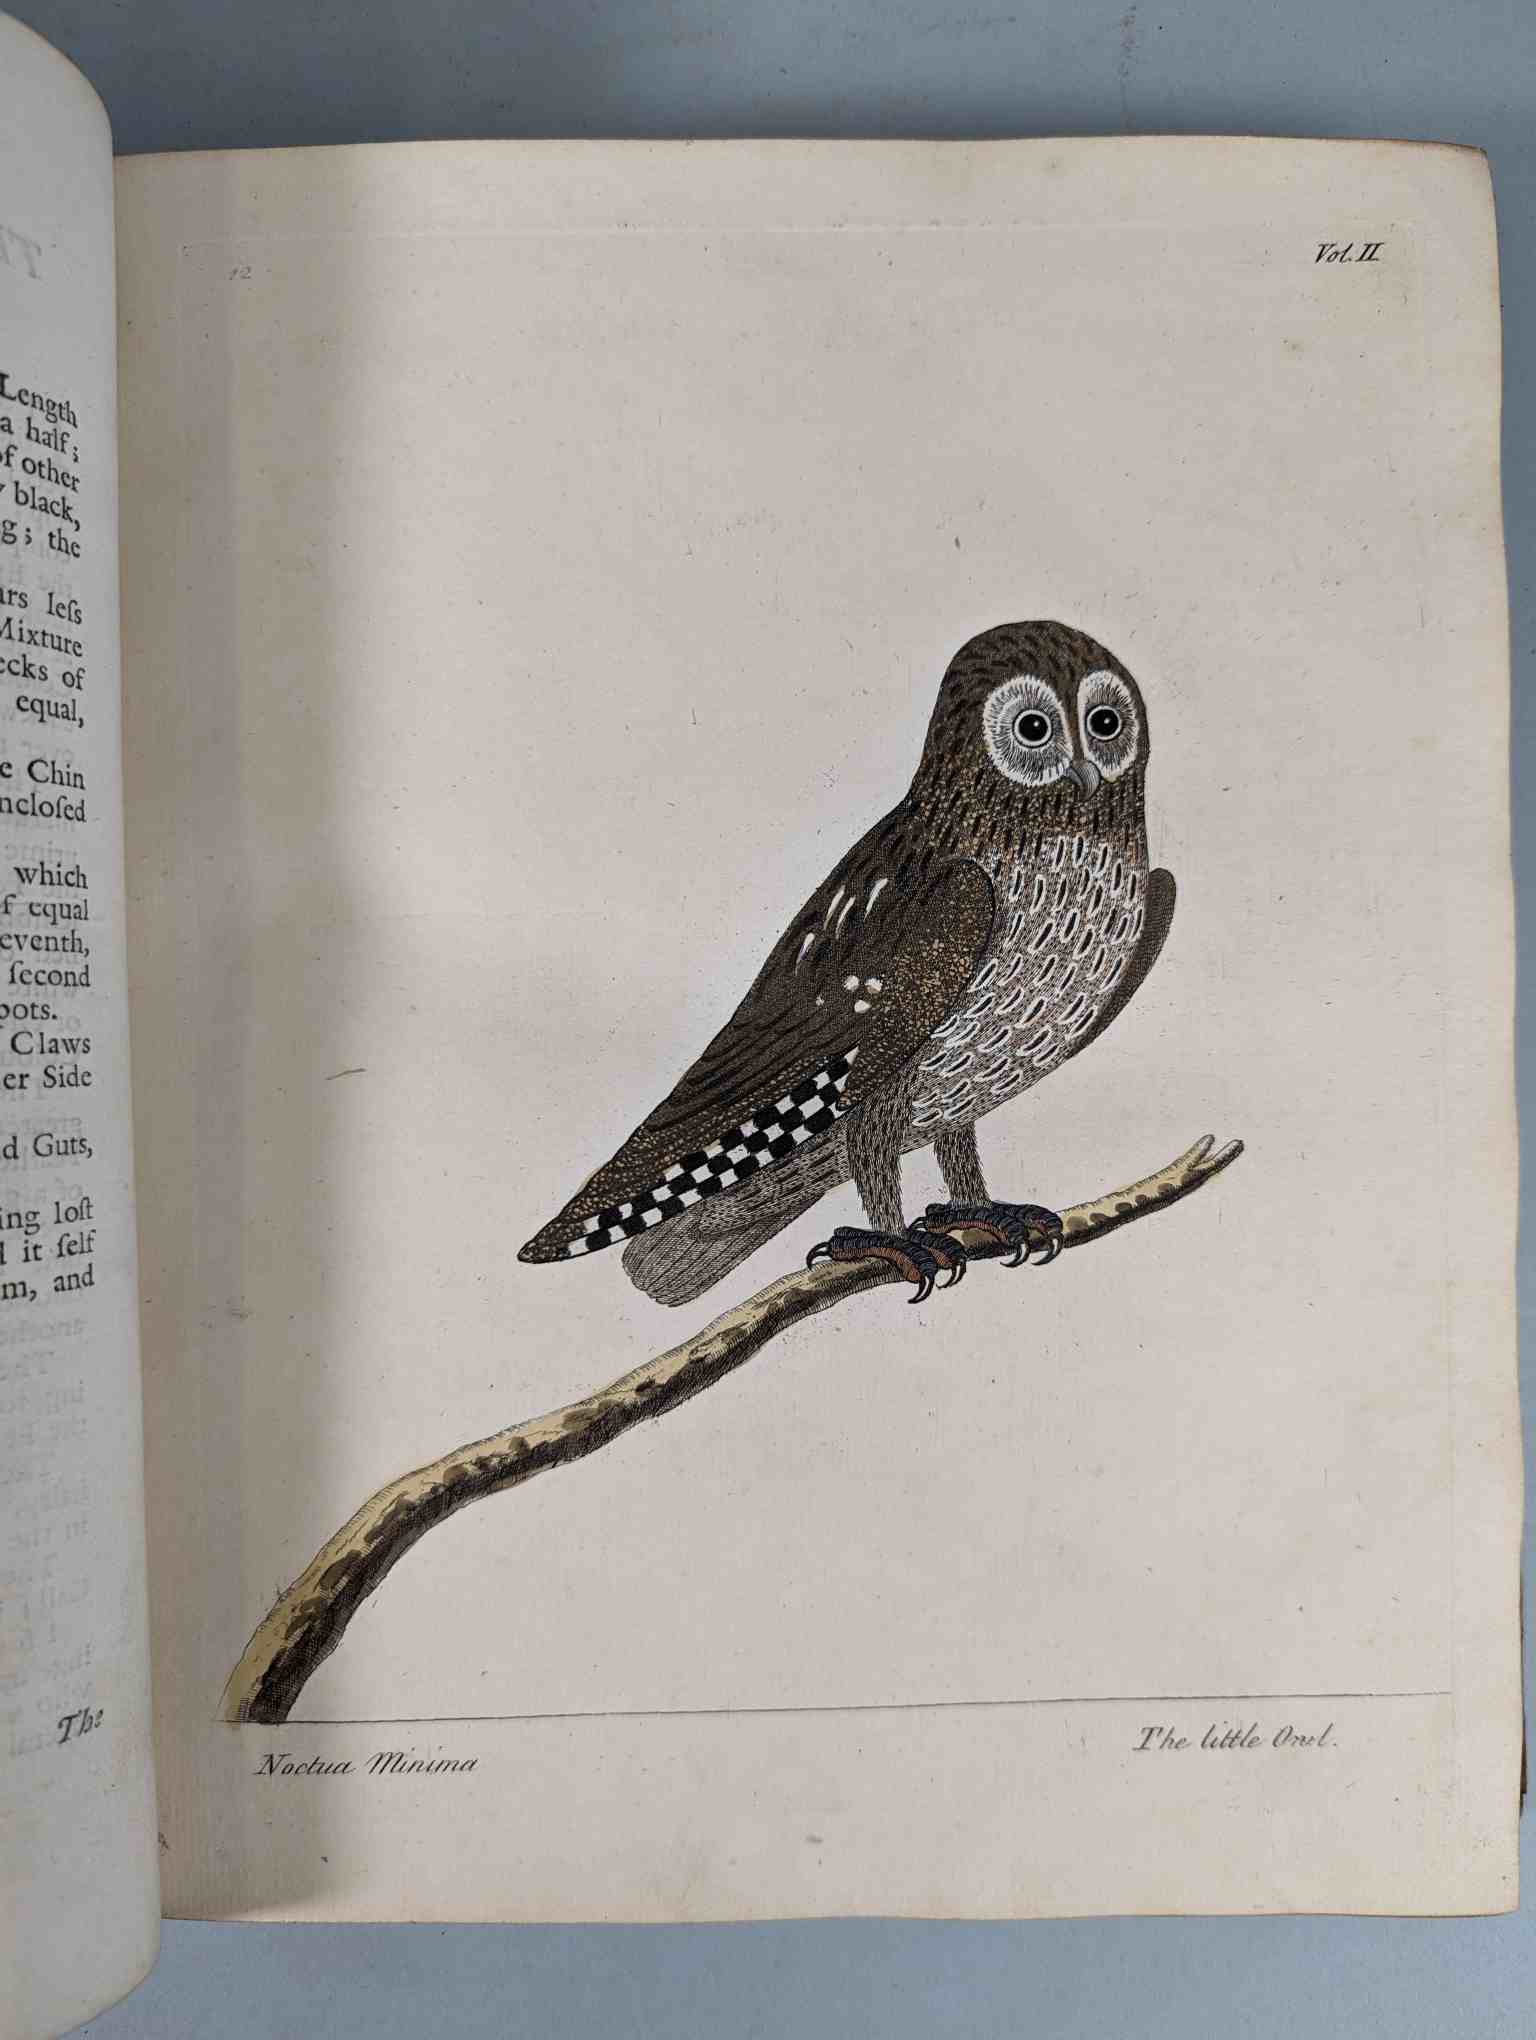 ALBIN, Eleazar. A Natural History of Birds, to which are added, Notes and Observations by W. - Image 116 of 208